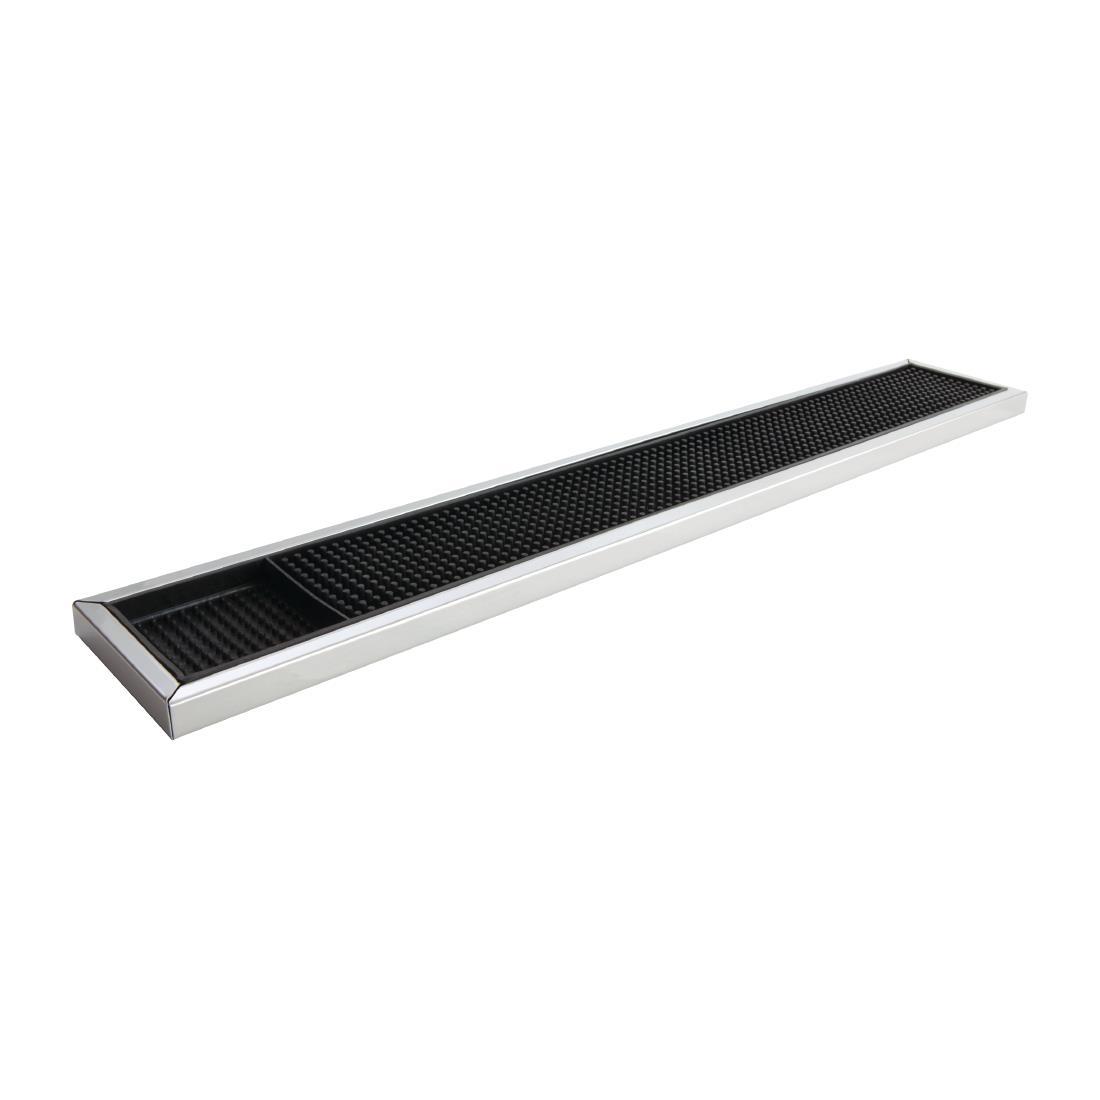 Beaumont Rubber Bar Mat with Stainless Steel Frame 600 x 100mm - CN741  - 1